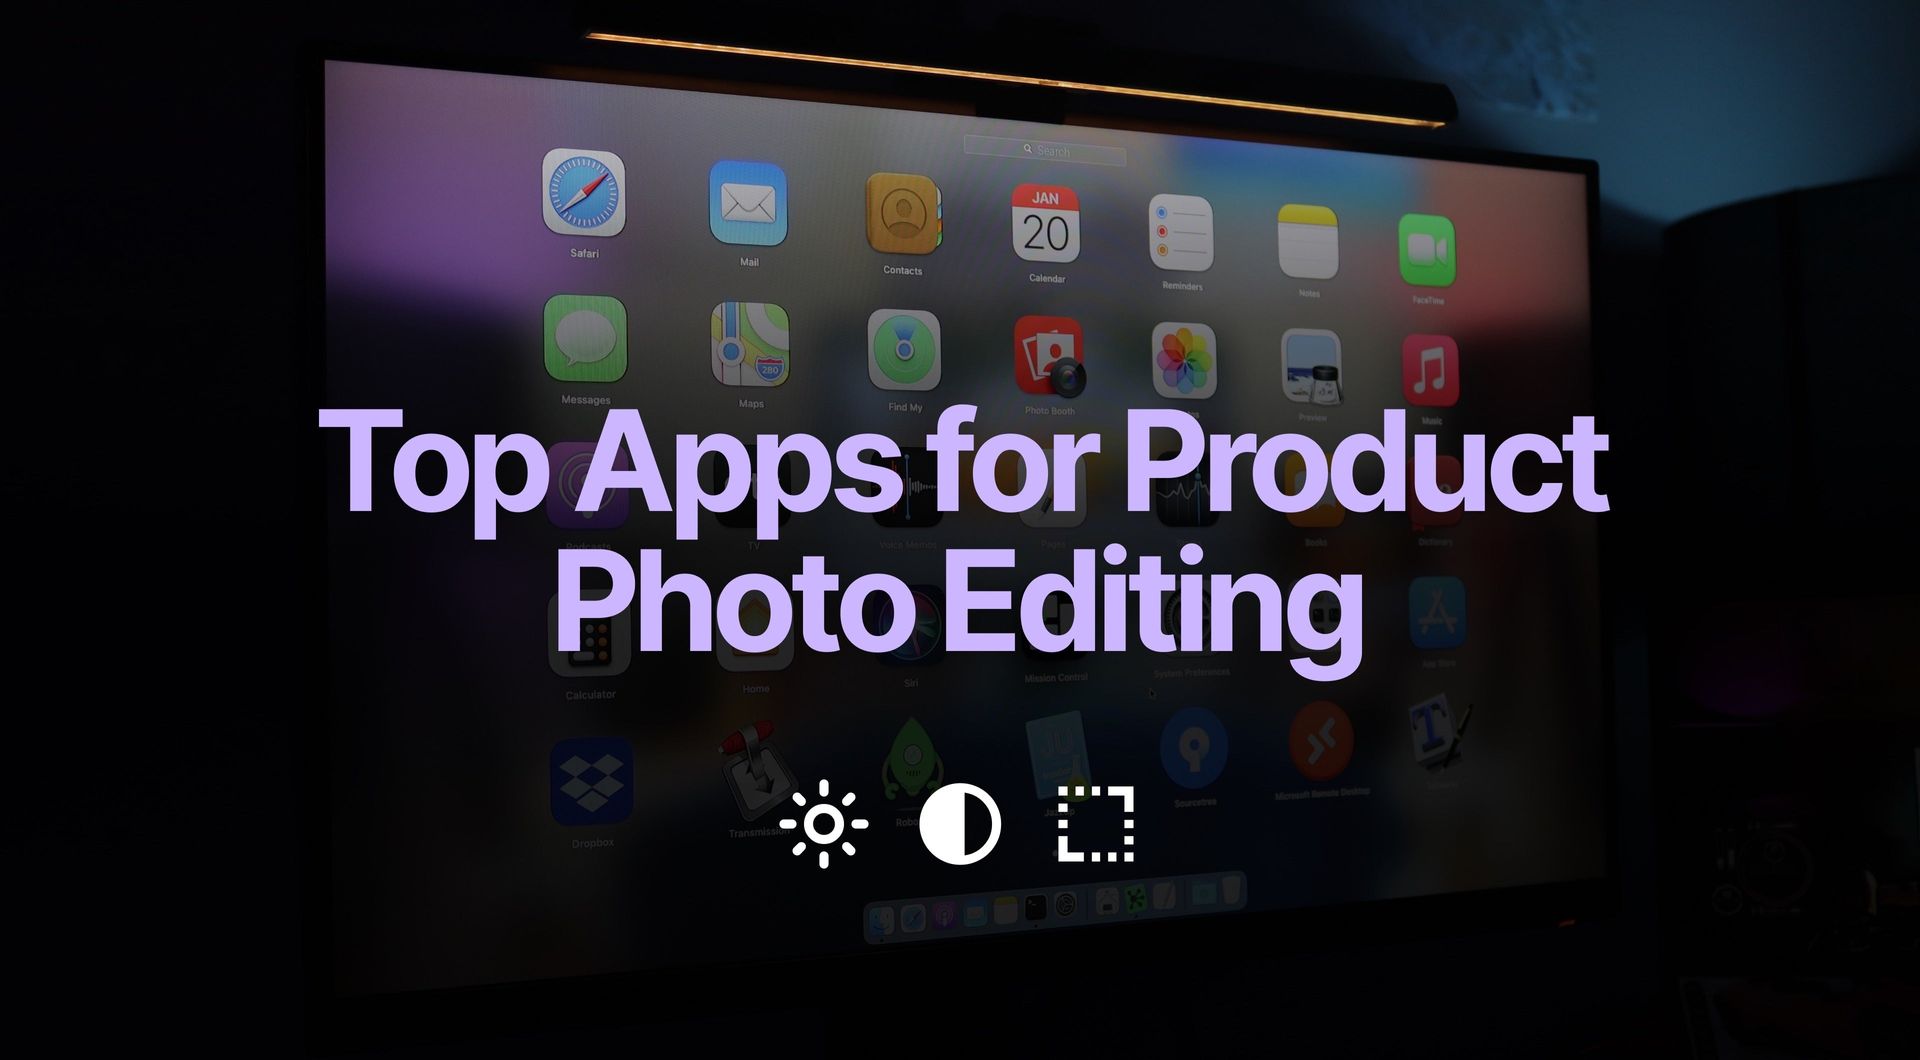 Picture for Top 5 Product Photo Editing Apps article